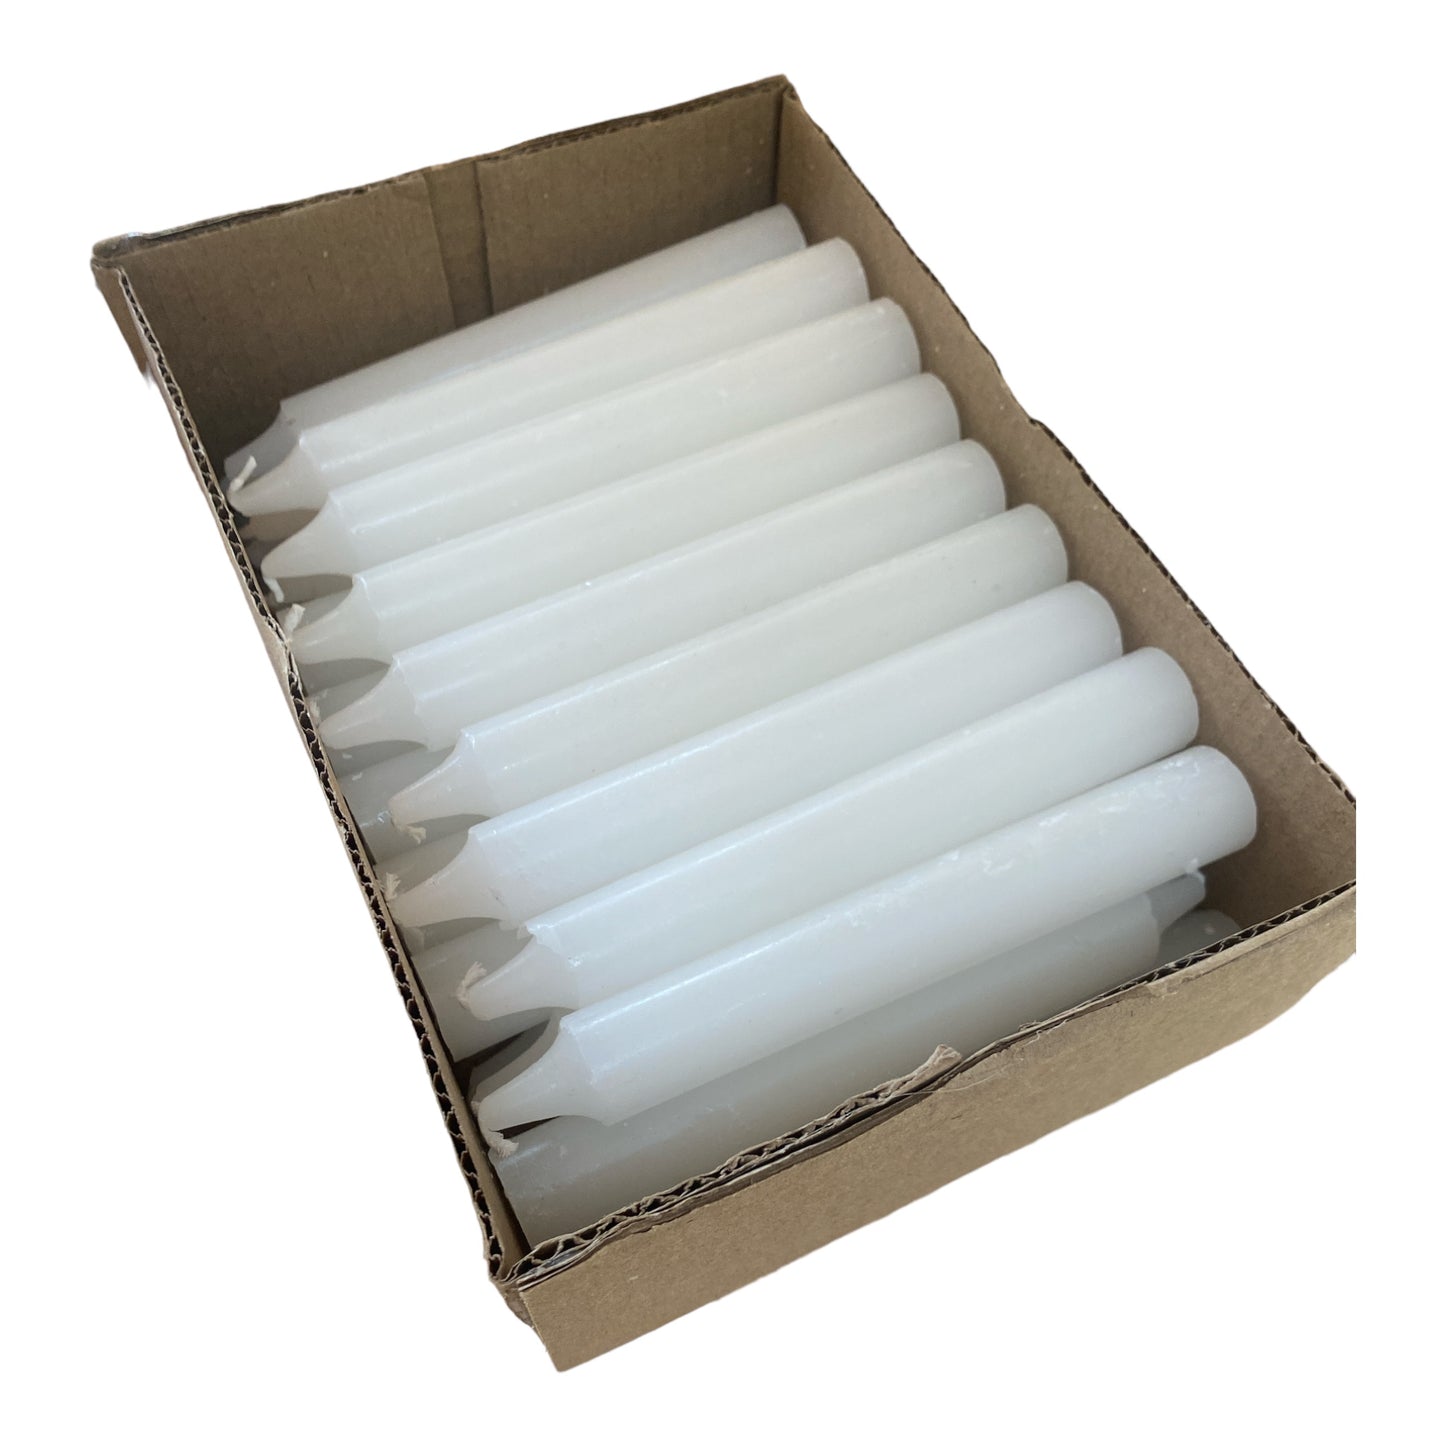 Box of 30 - White Candles